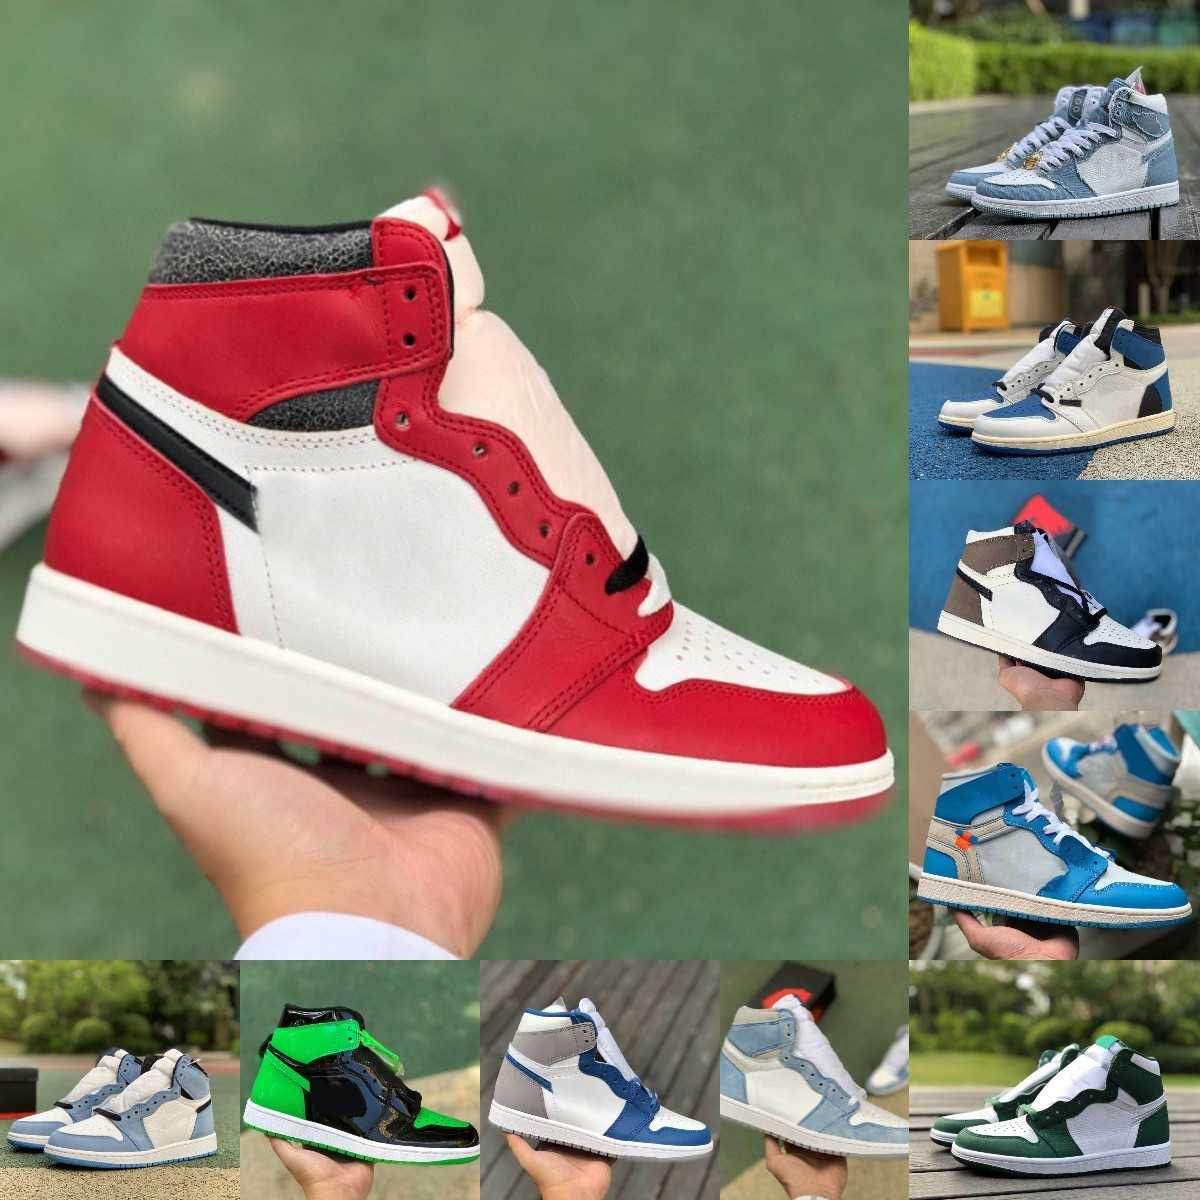 

2023 Chicago Lost Found Jumpman 1 1s Basketball Shoes True Turbo Blue Pine Green Gorge Denim Shadow 2.0 Stage Haze Hyper Royal Bio Hack TWIST Designer Sports Sneakers S8, Please contact us